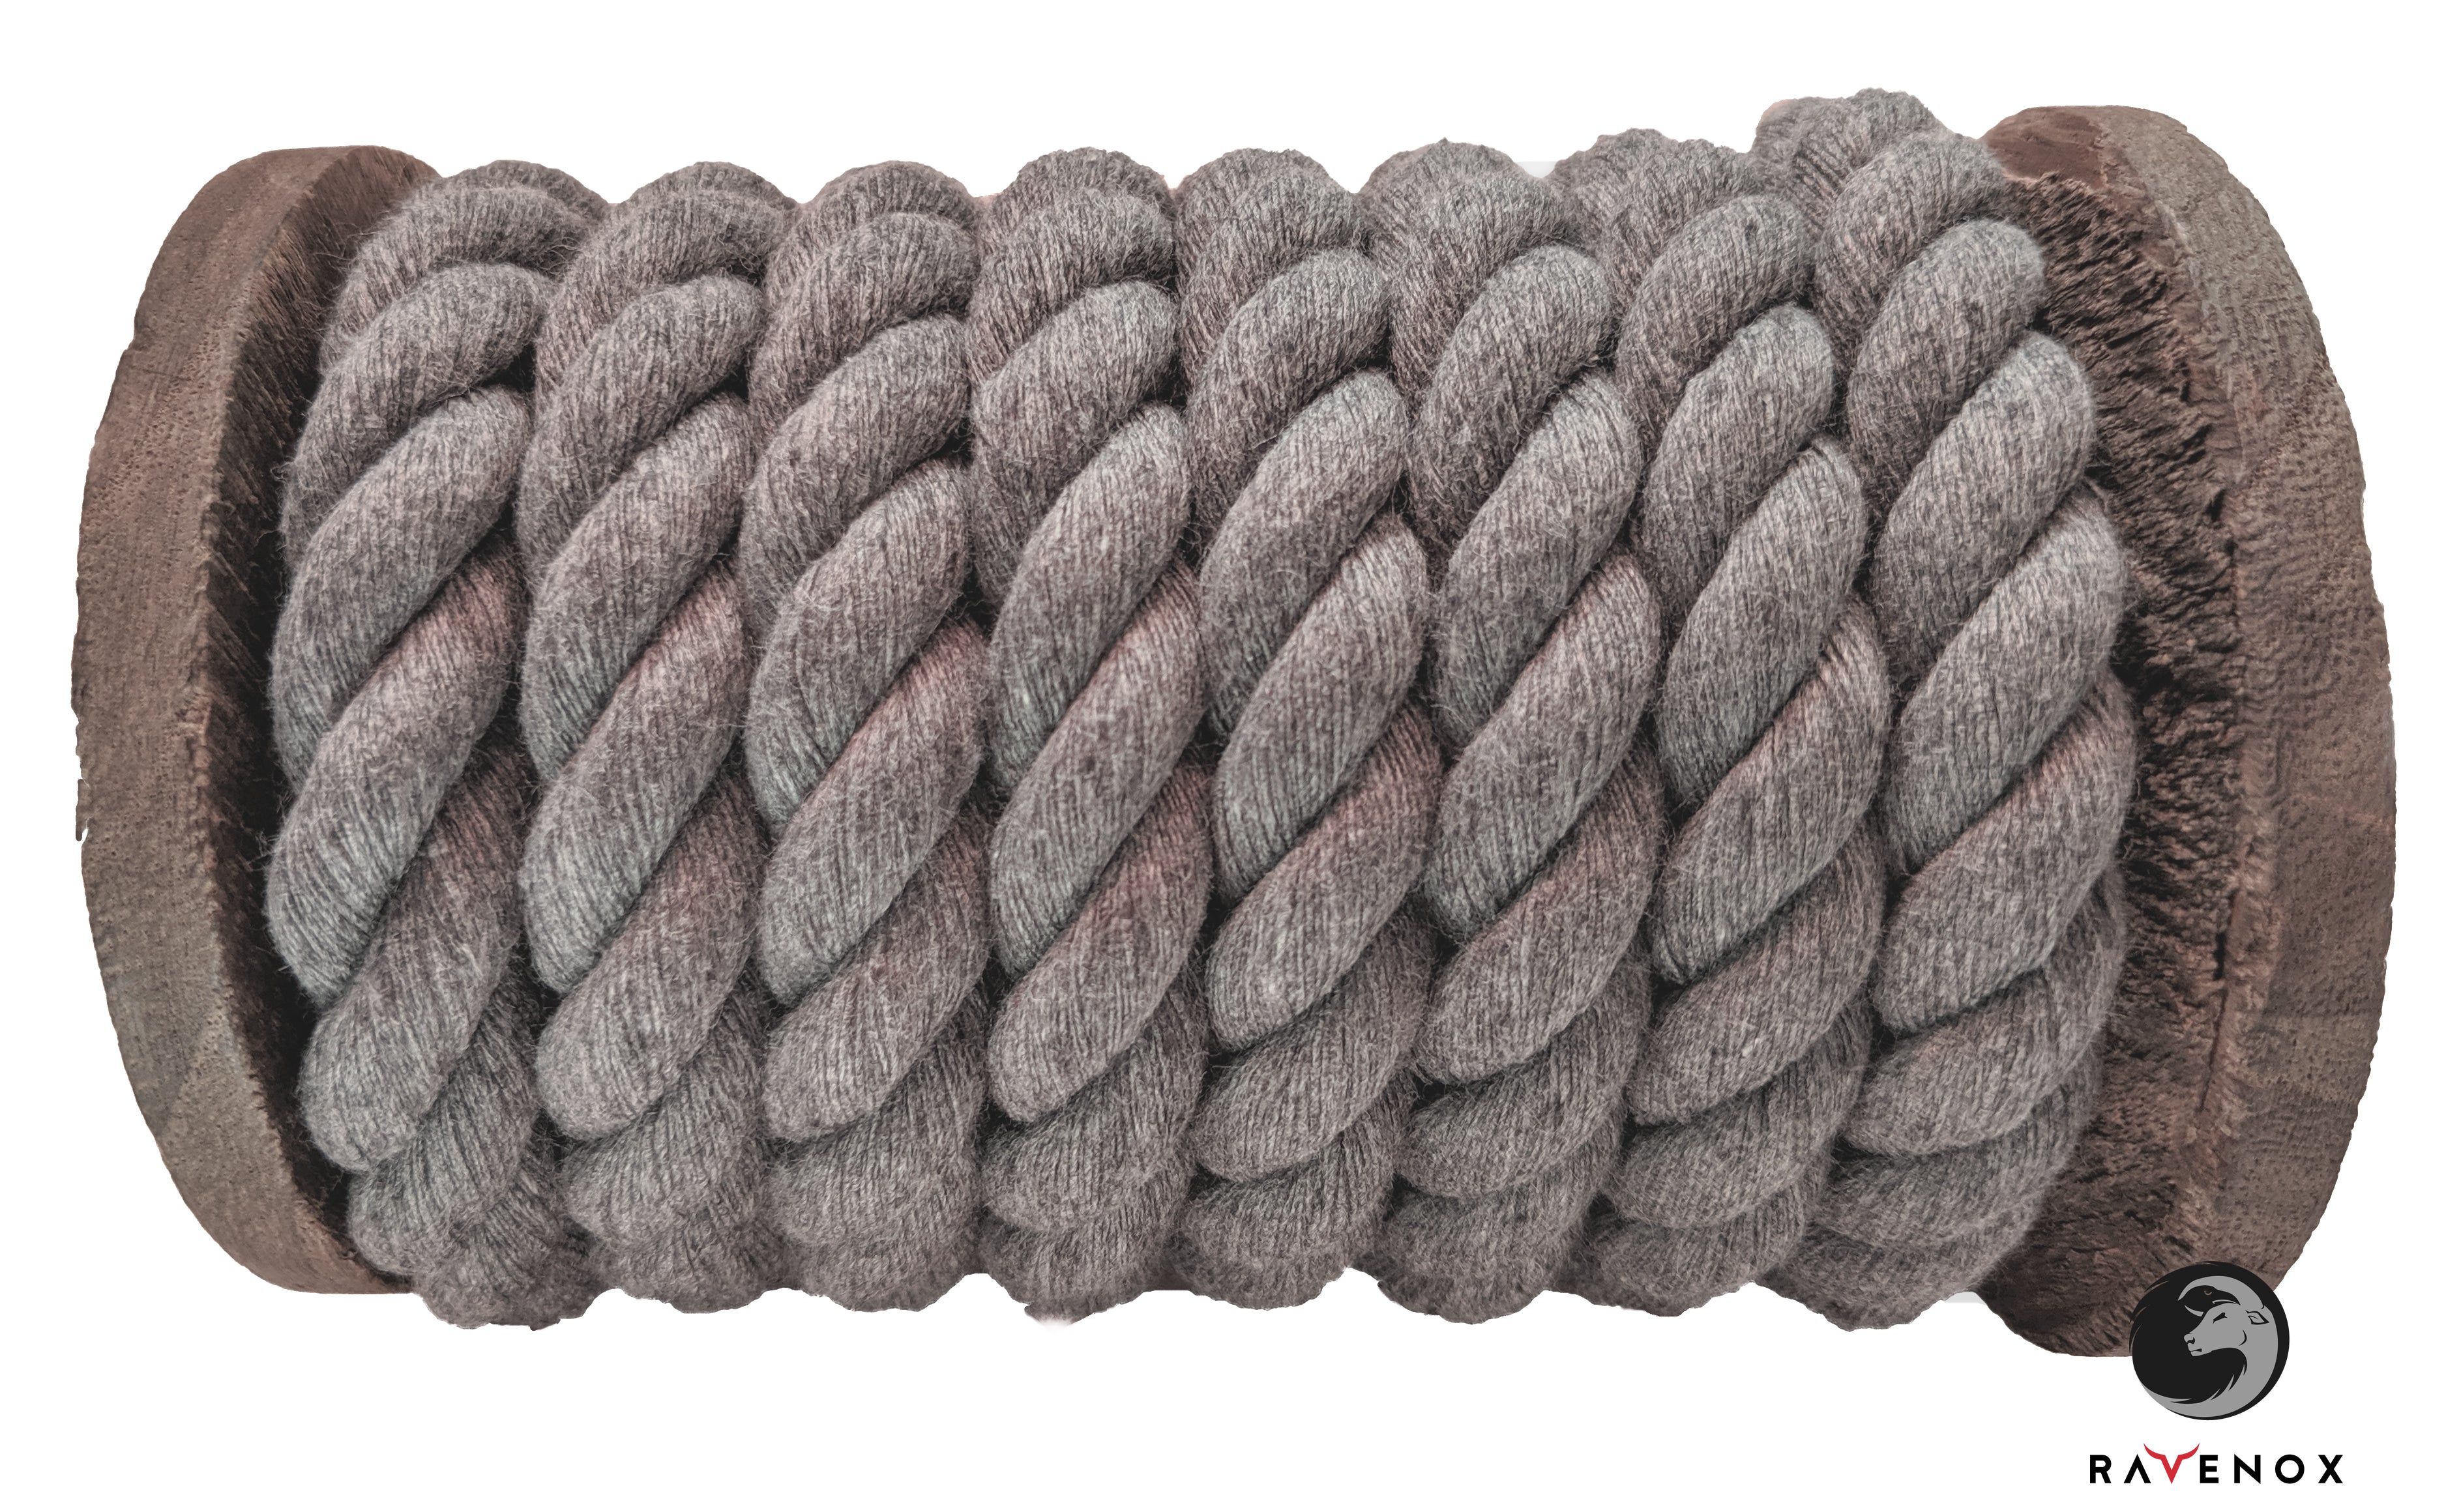 Ravenox Natural Twisted Cotton Rope, 1/4-inch X 10 Feet, Black, Made in  USA